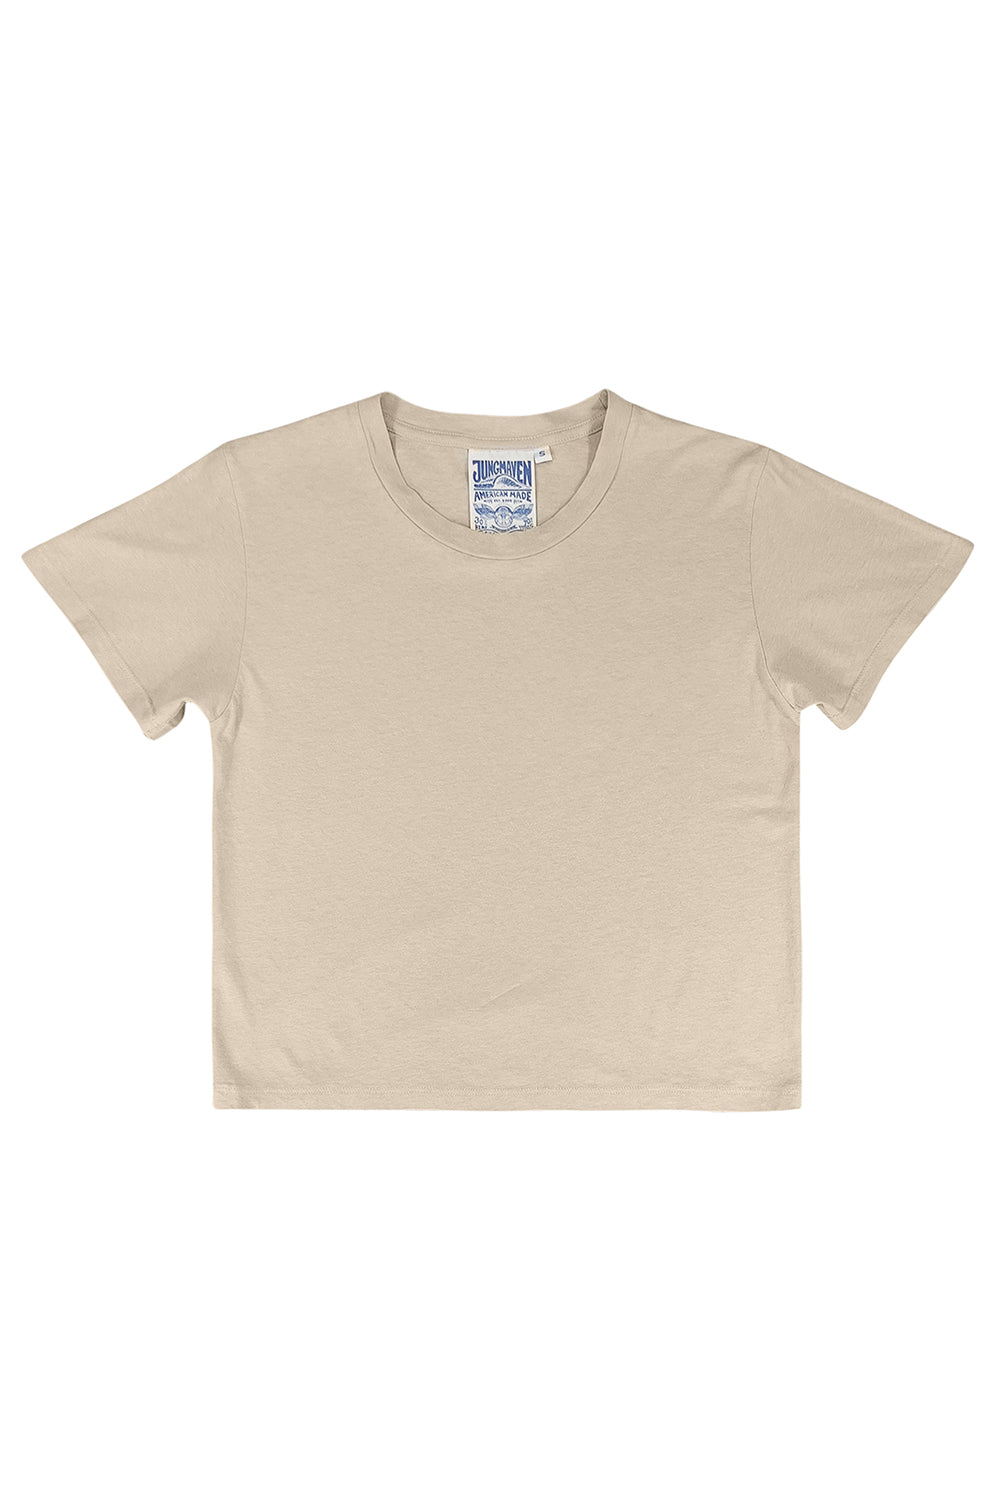 Cropped Ojai Tee | Jungmaven Hemp Clothing & Accessories / Color: Canvas